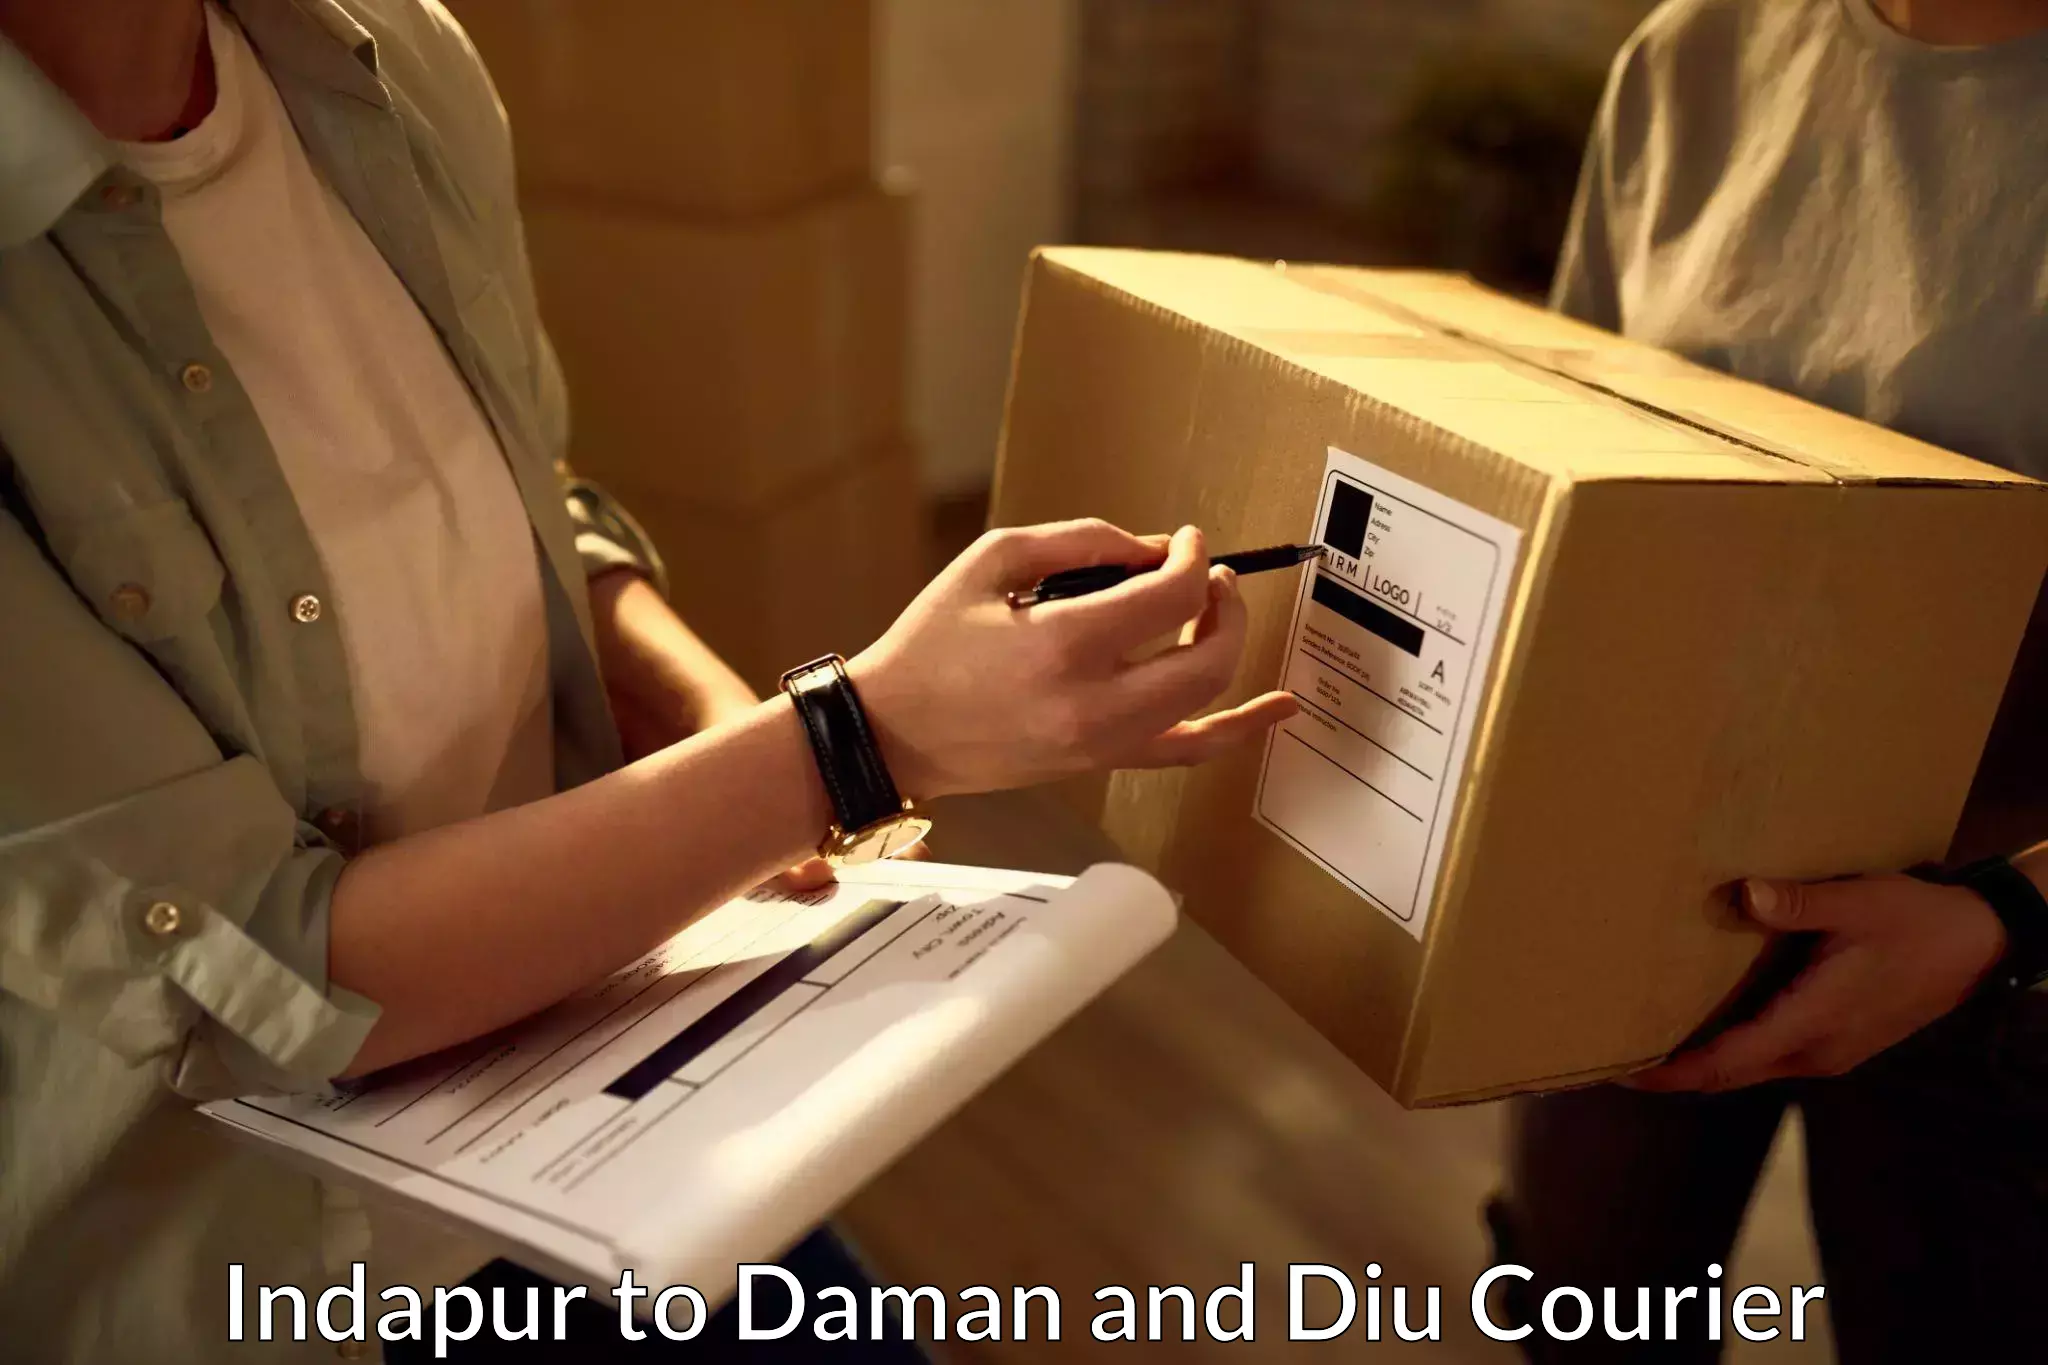 Next-day delivery options in Indapur to Daman and Diu